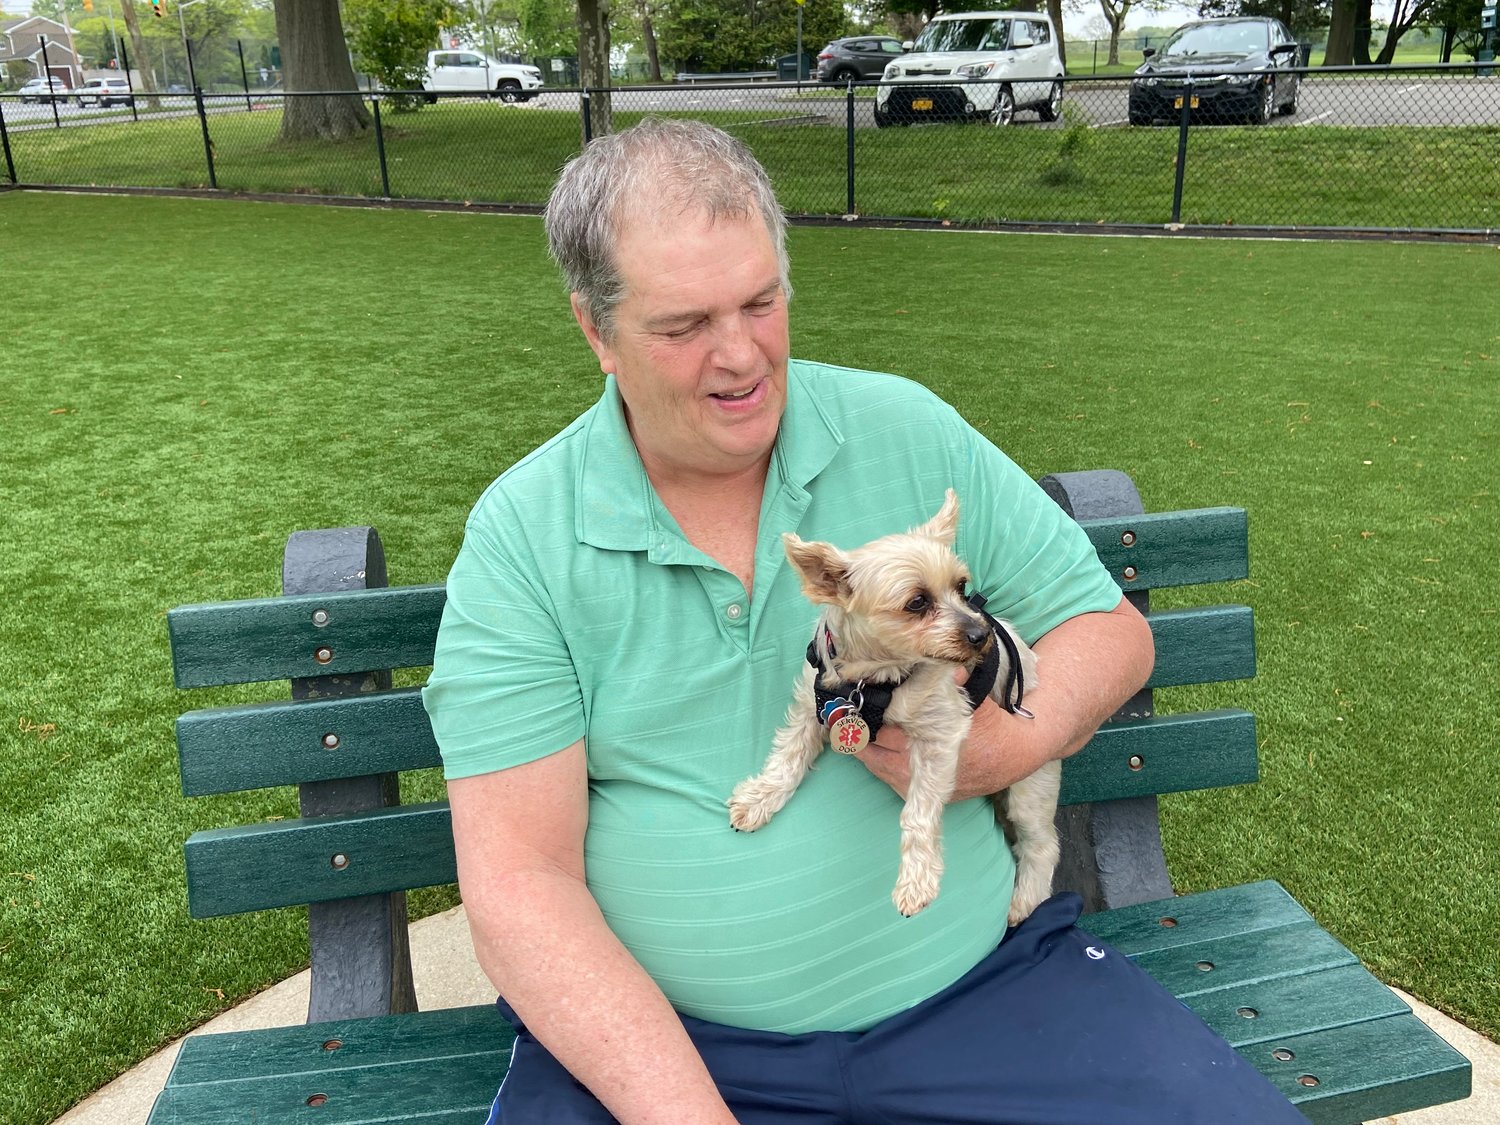 Sean Dolan and his service pup, Little Girl, a Teacup Yorkie had a great time on the new turf.